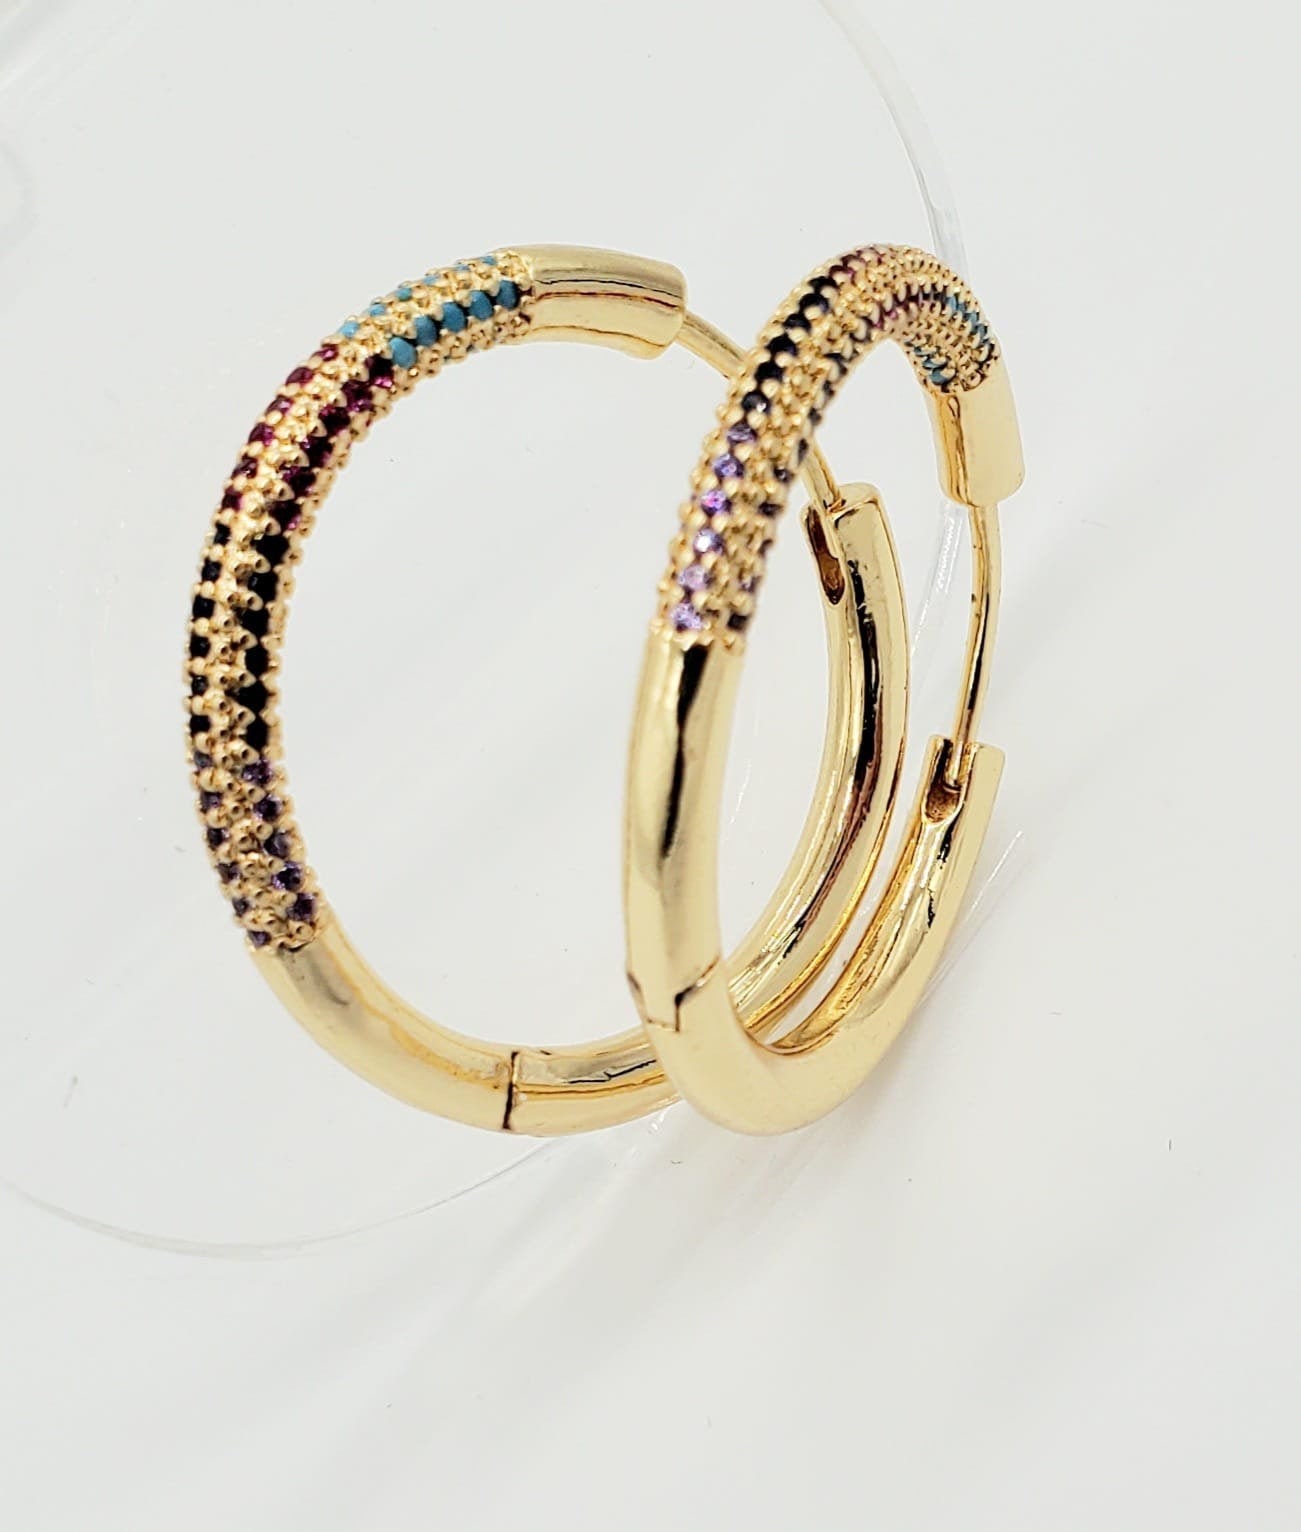 Large Thick 18k Gold Layered Colorful Pave Cubic Zirconia Hoop Earrings 1"